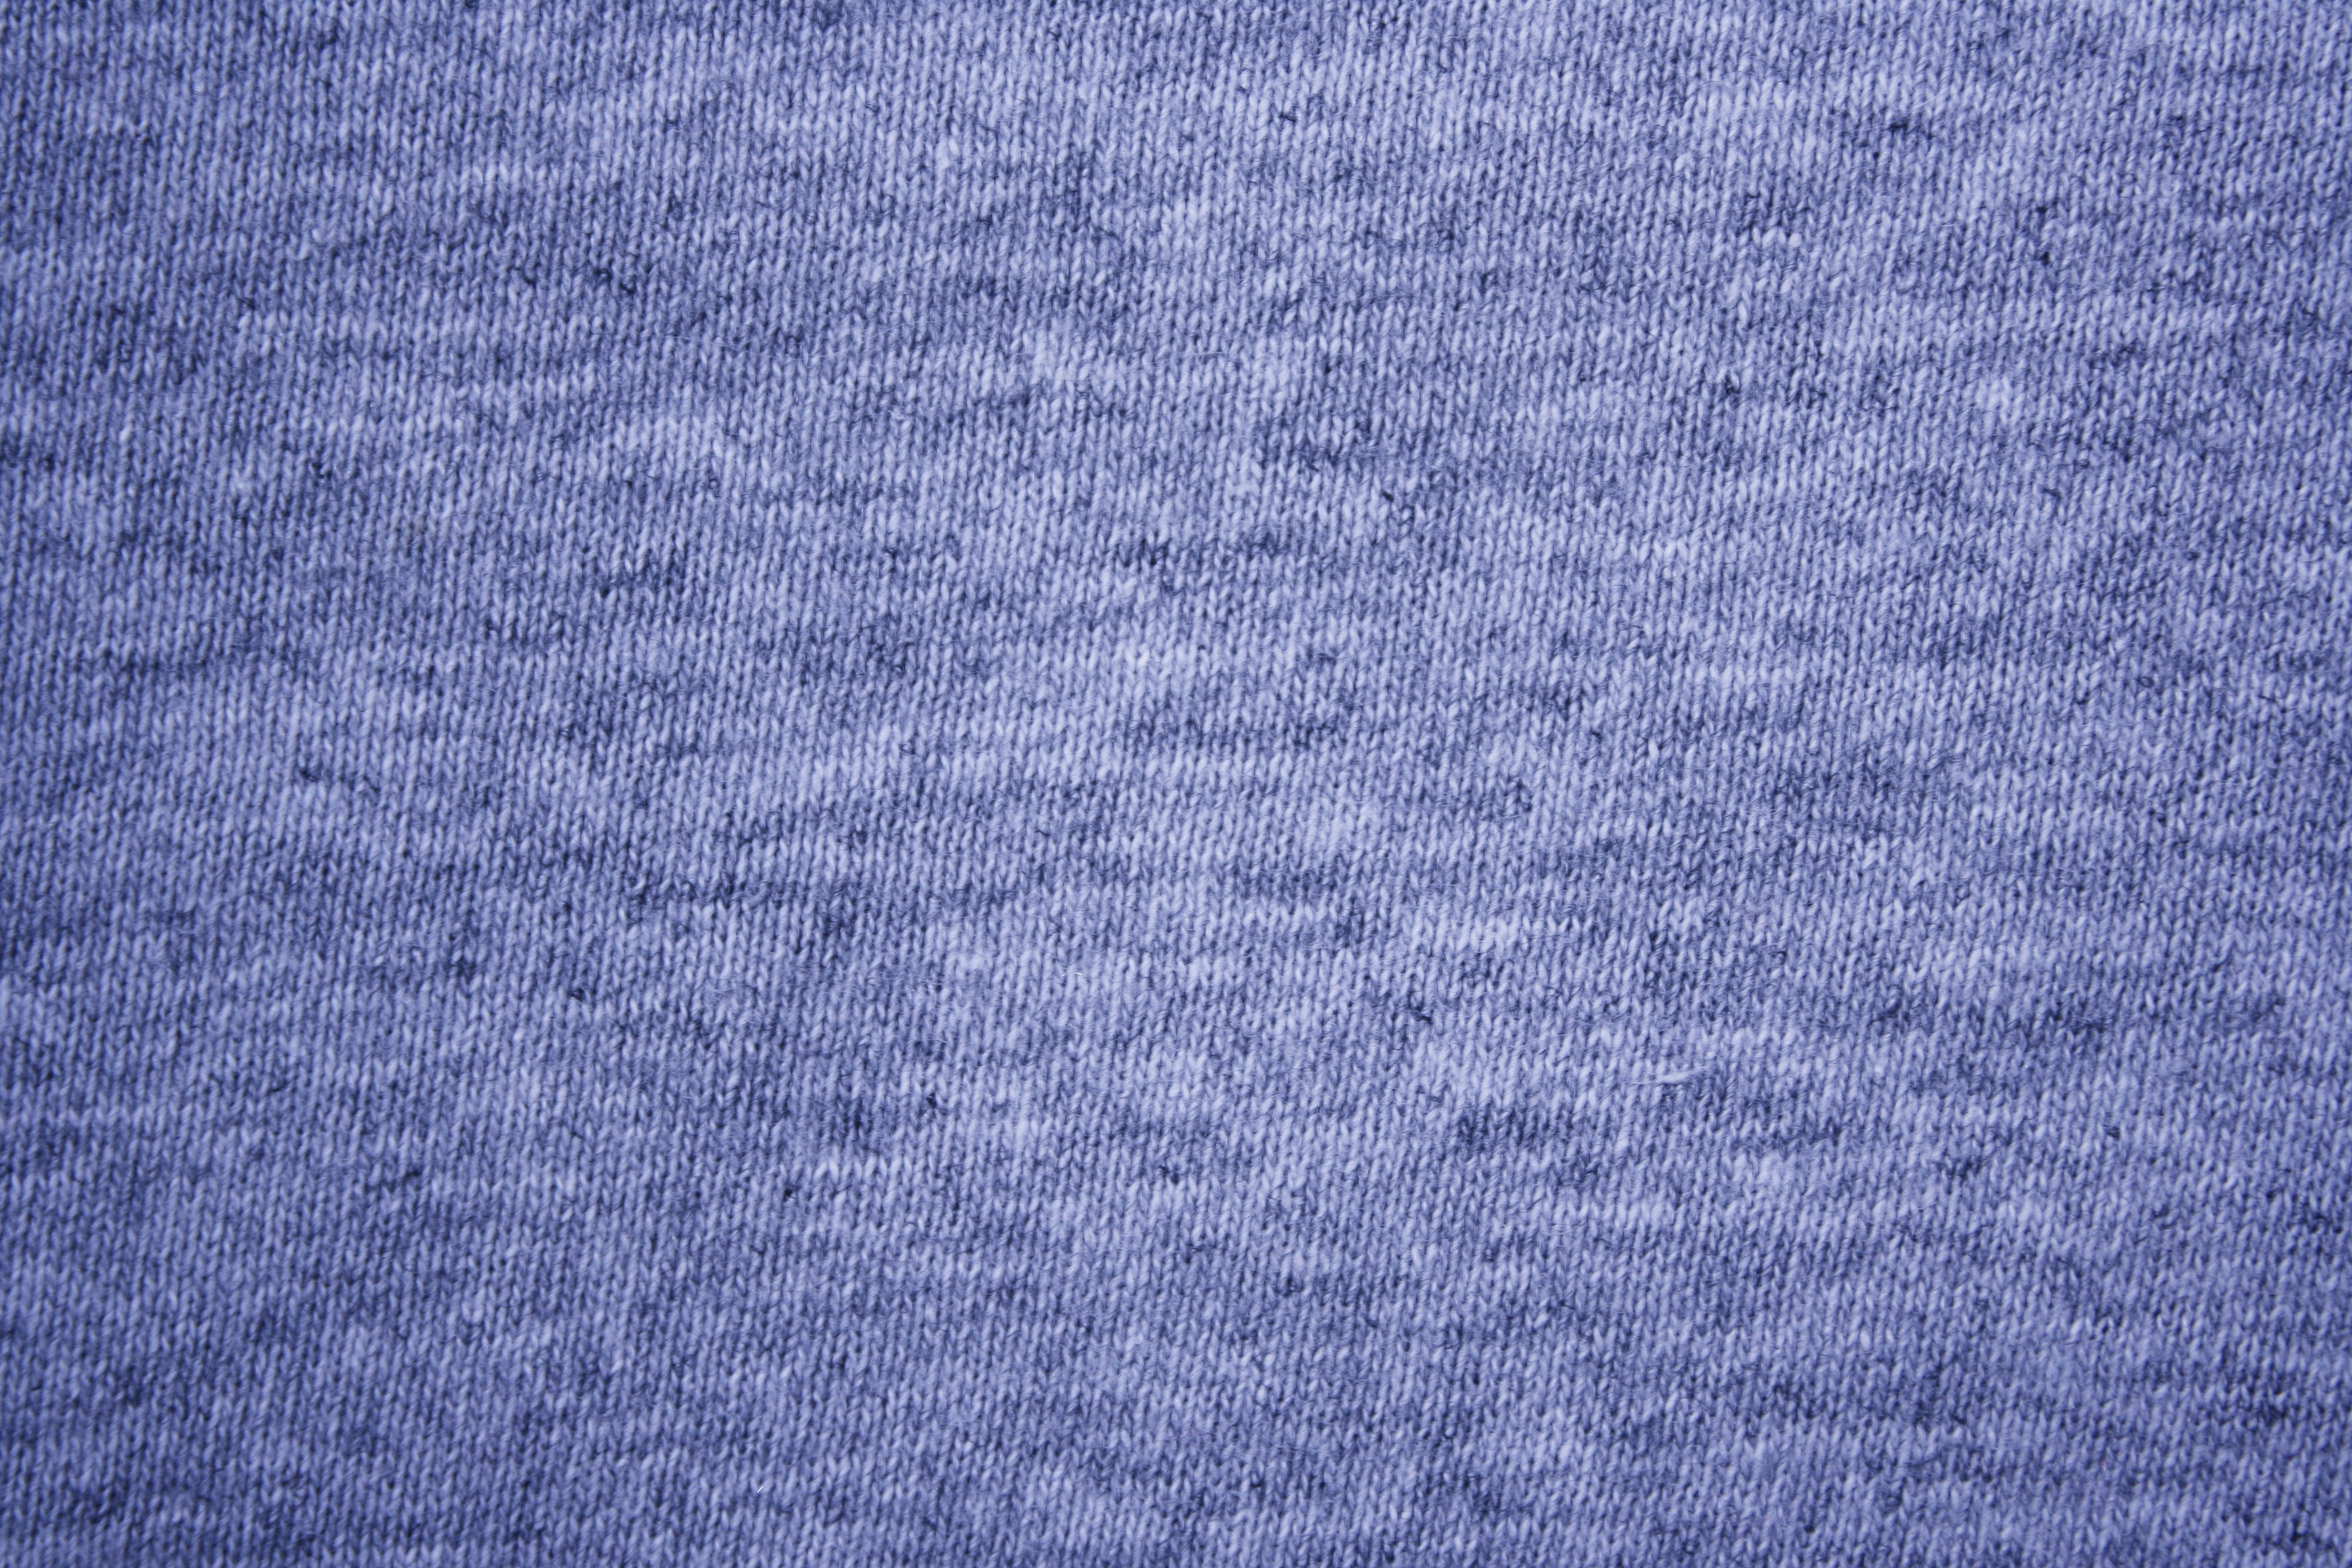 Heather Blue Knitted Fabric Pattern Stock Image - Image of